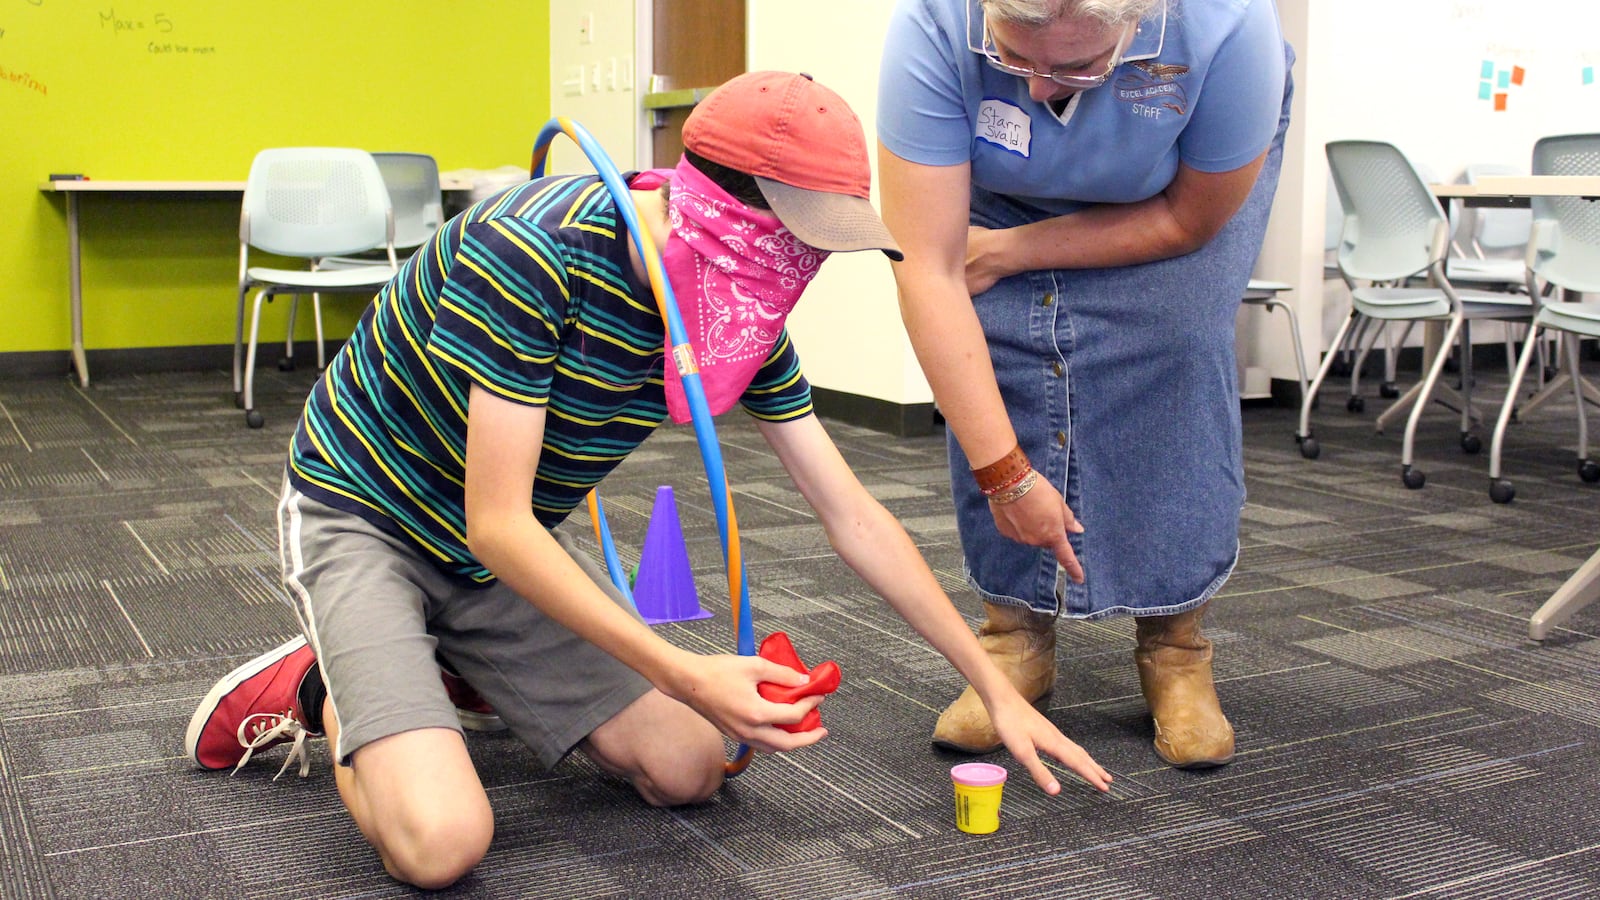 A student forms their first name initial with Play-Doh while holding a hula hoop. The teacher guided him through a series of tasks while blindfolded as part of a game that was meant to teach trust.